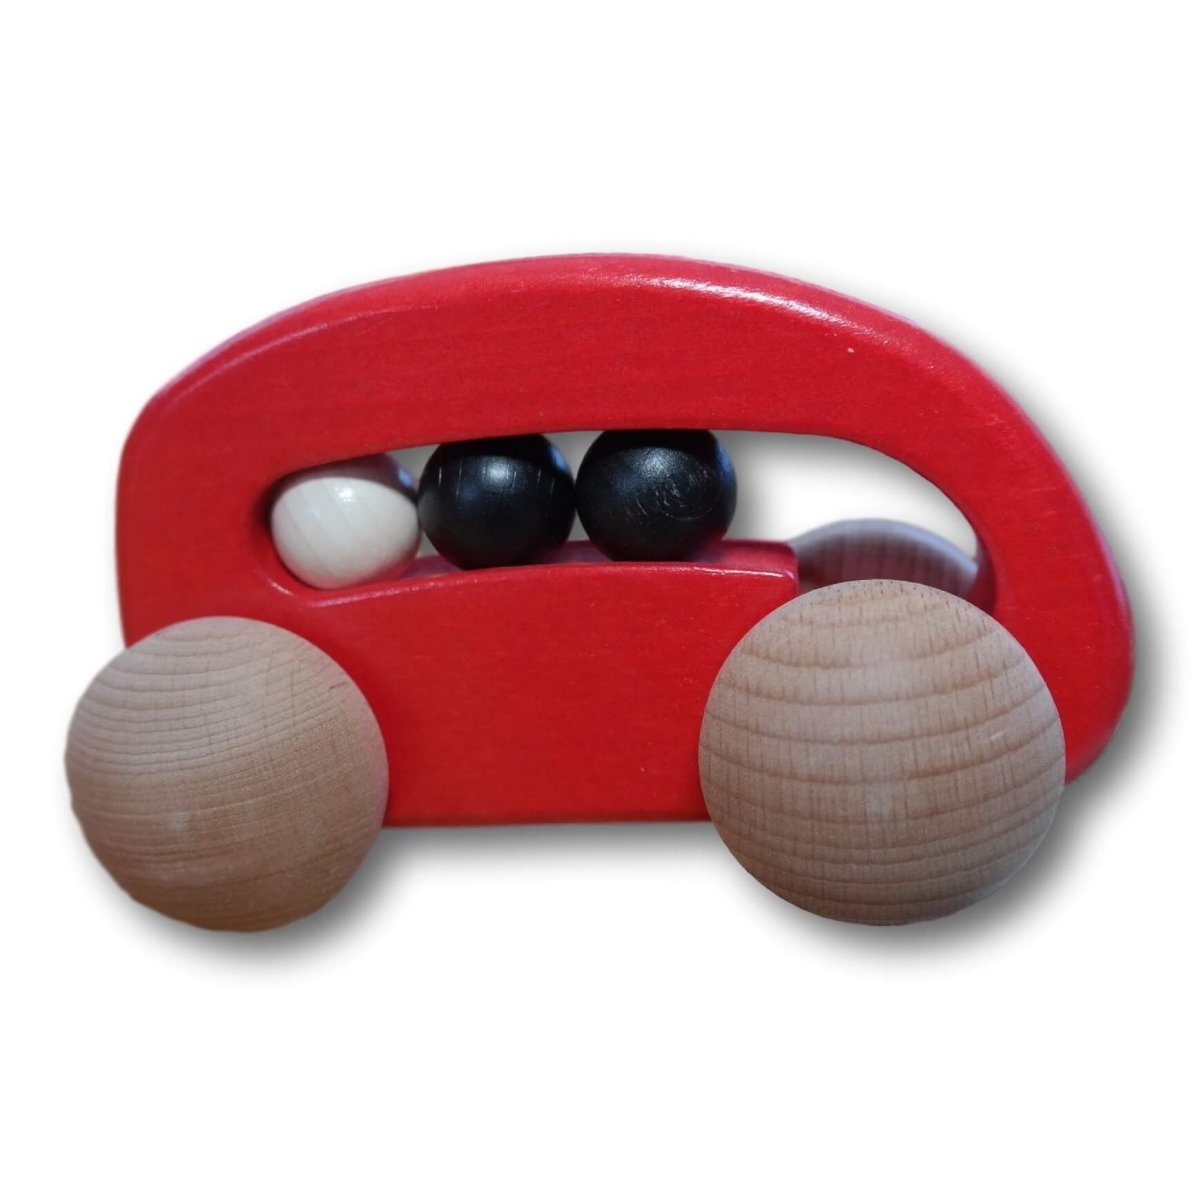 Wooden Car with Beads by Bajo - Challenge & Fun, Inc.-BJ49310-2